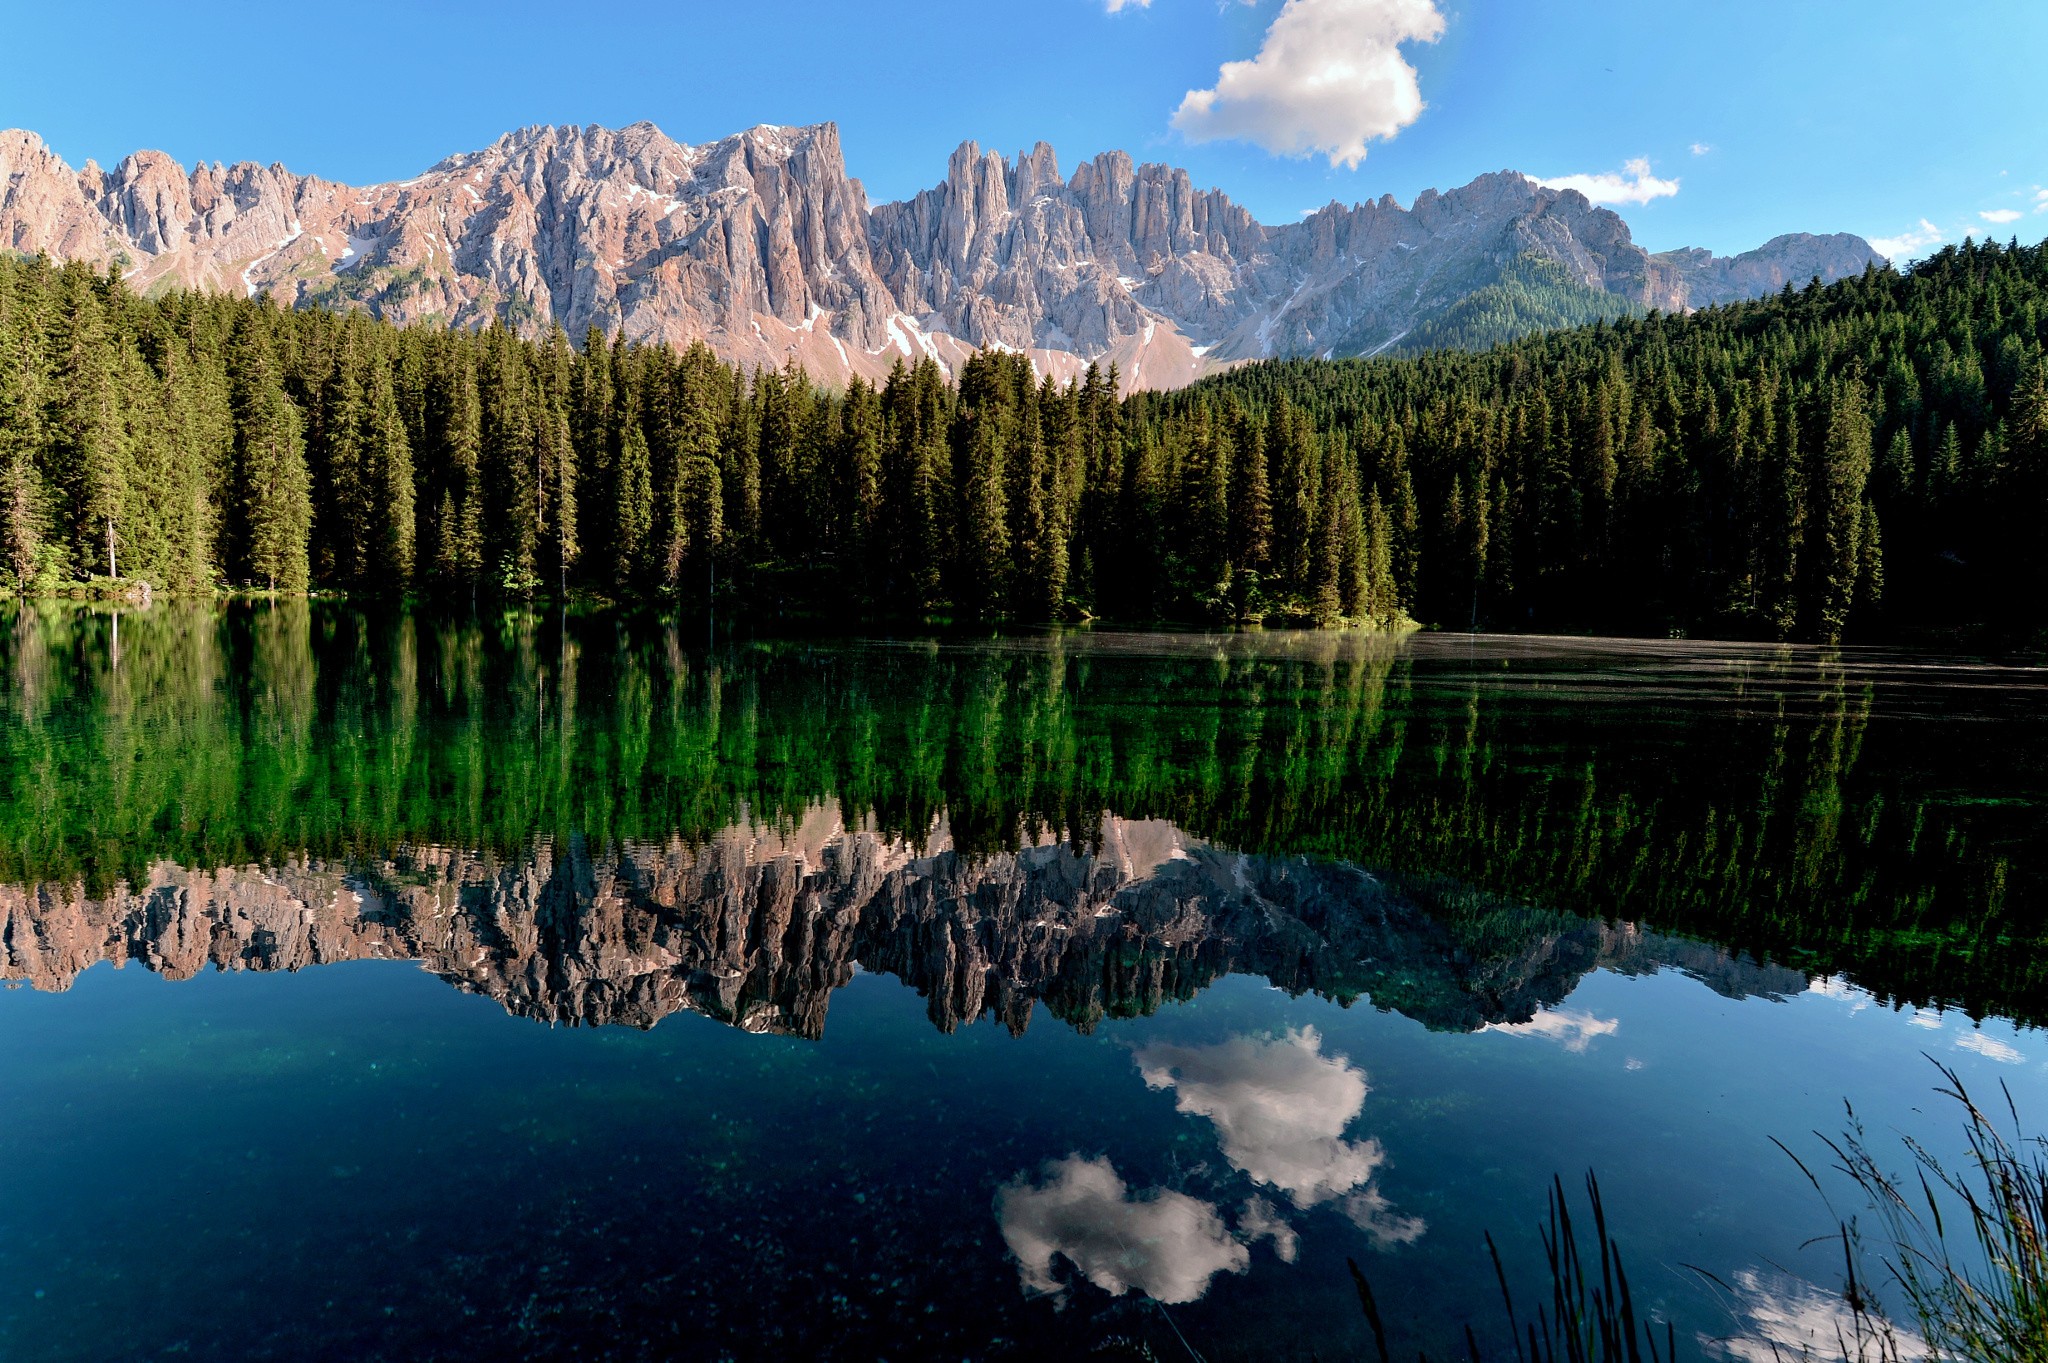 Landscape Karersee Dolomites Mountains Dolomite Alps Lake Reflection Mountains Forest 2048x1363